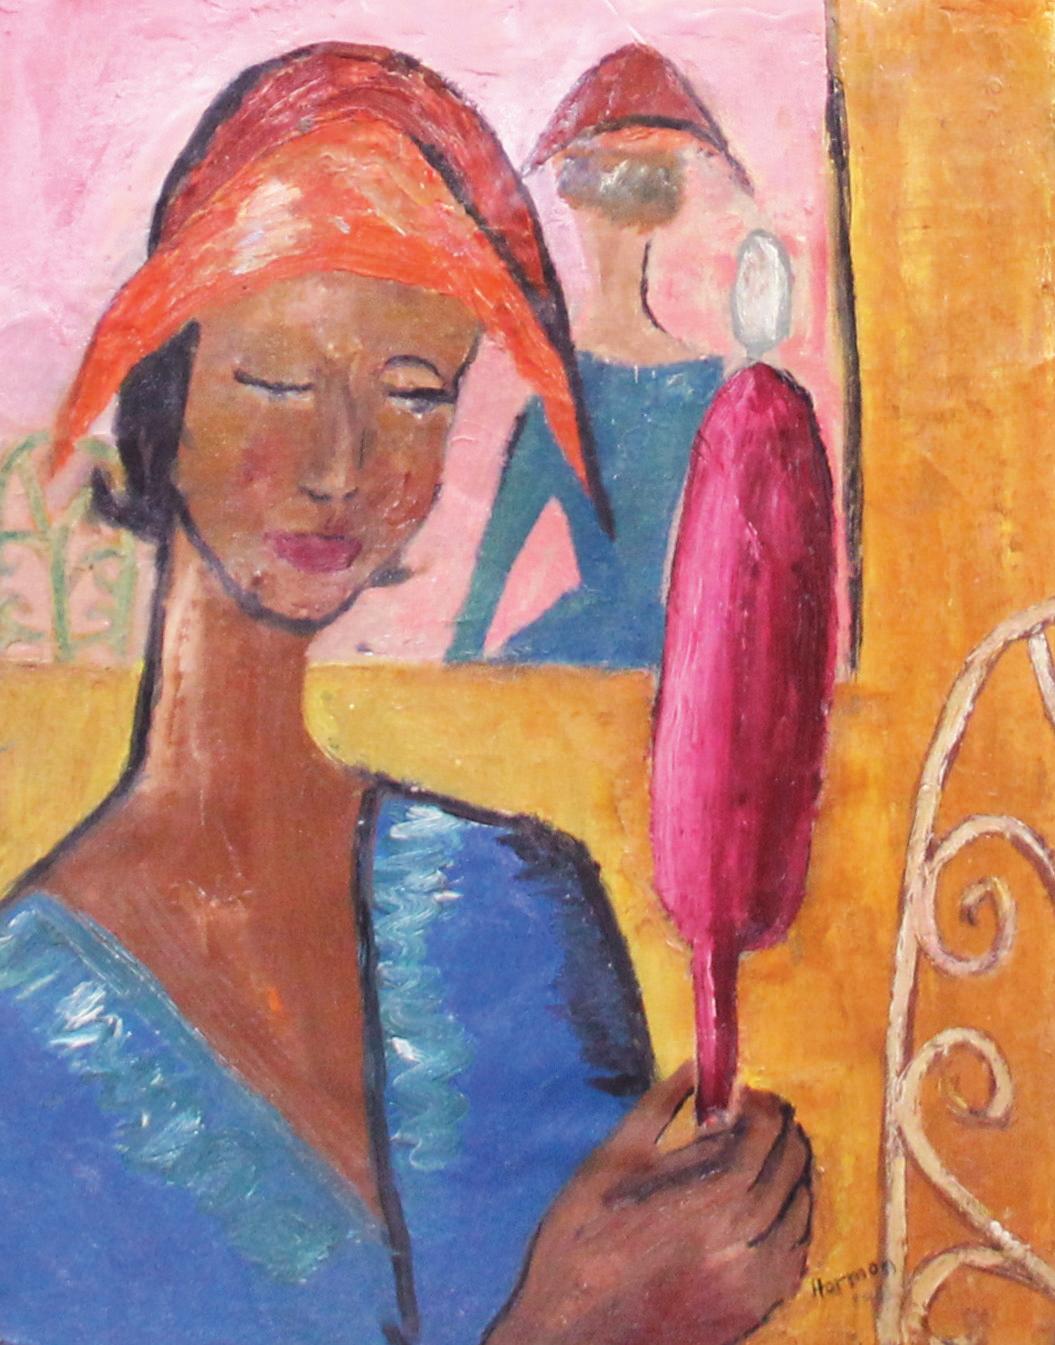 New Hat, Expressionist Portrait of Woman by Philadelphia Artist - Painting by Bernard Harmon